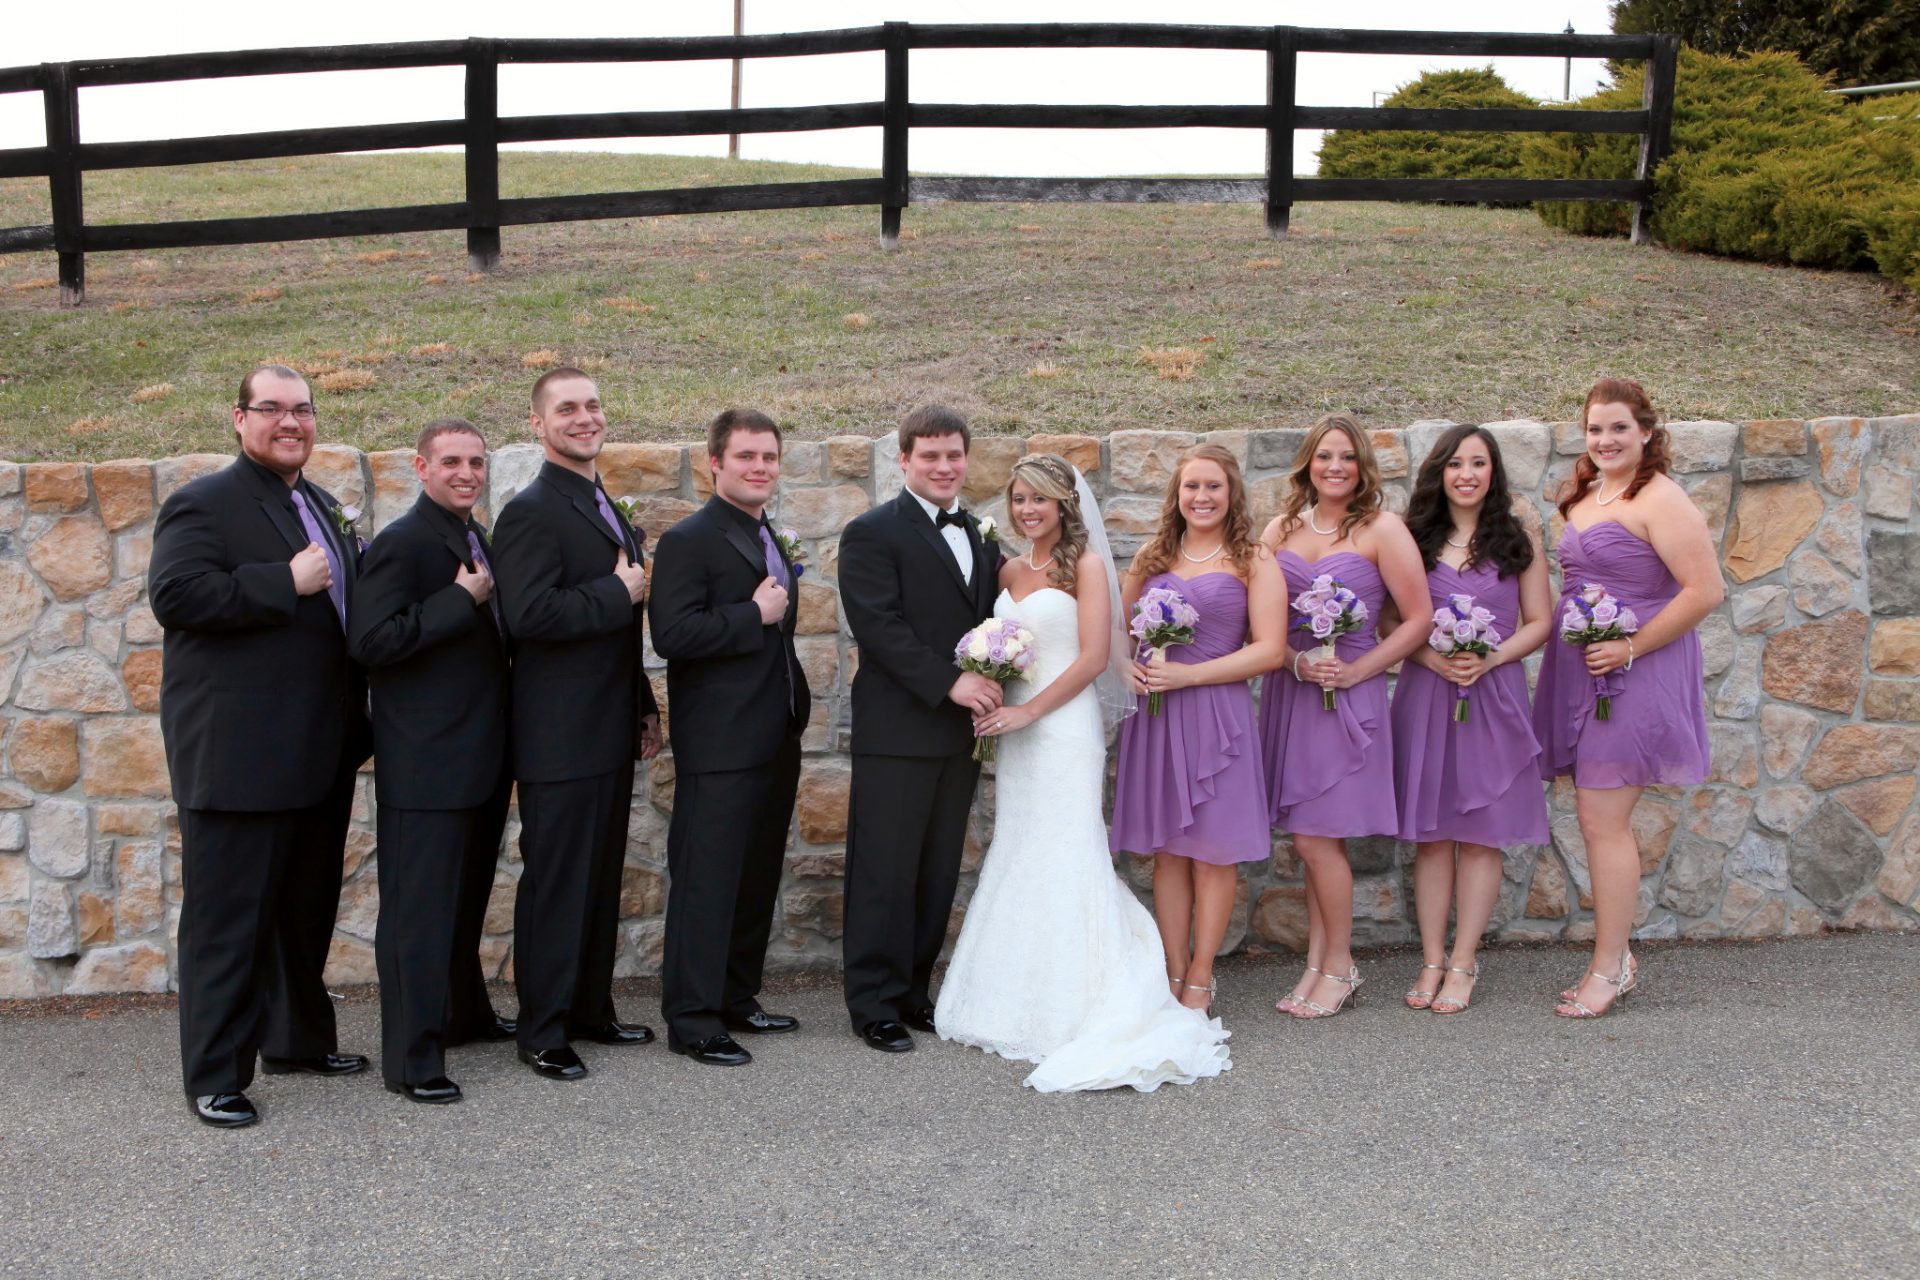 Wedding party pose in front of stone wall